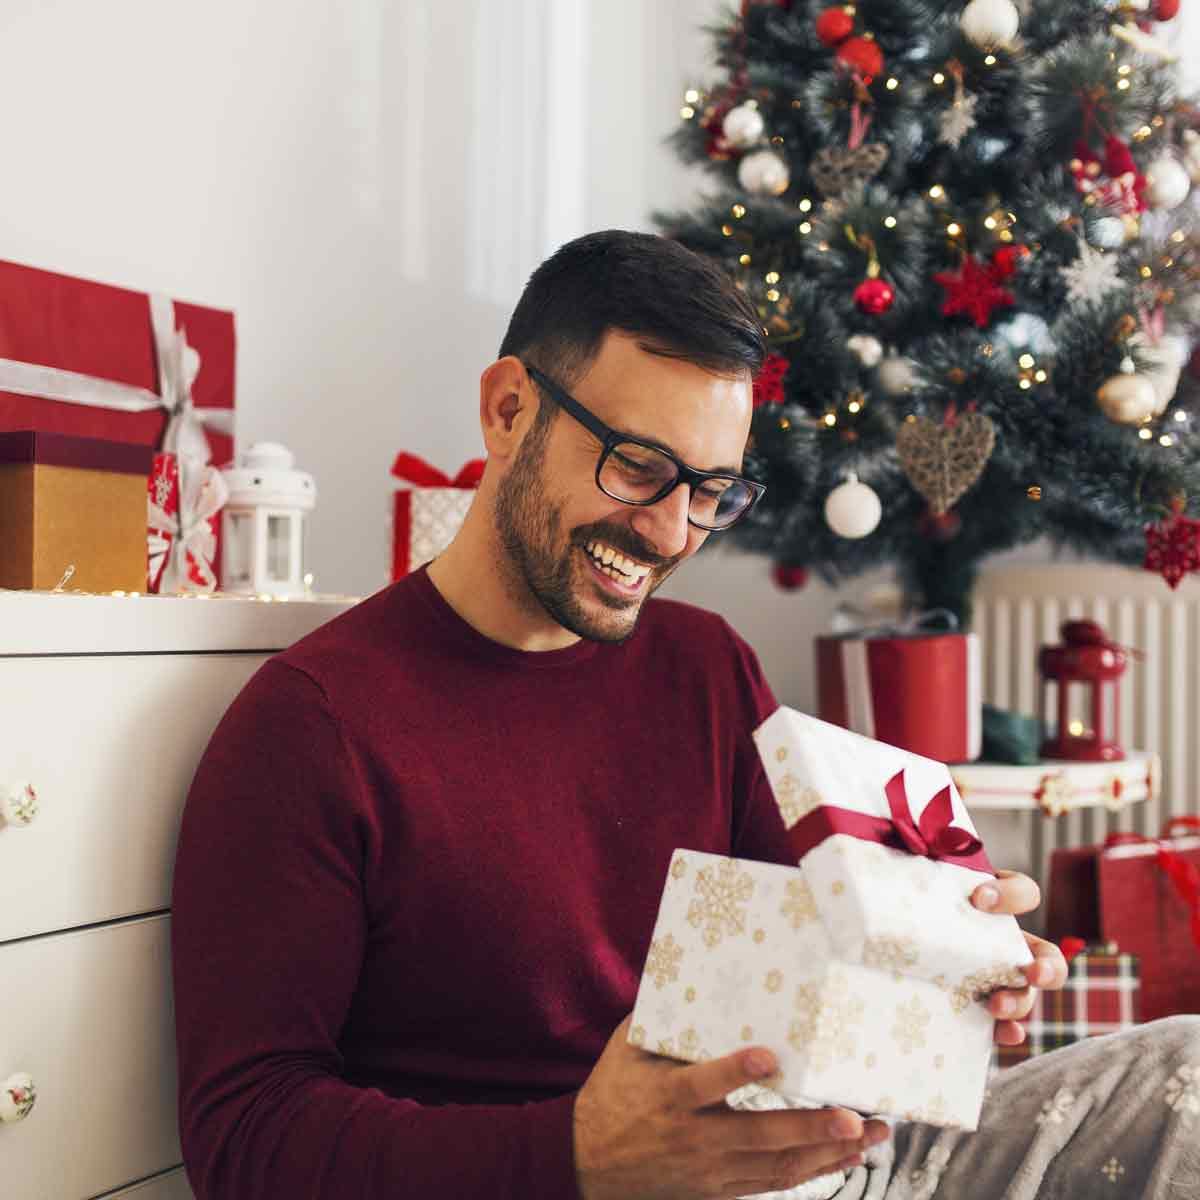 Smiling-young-man-opening-Christmas-gift-at-home